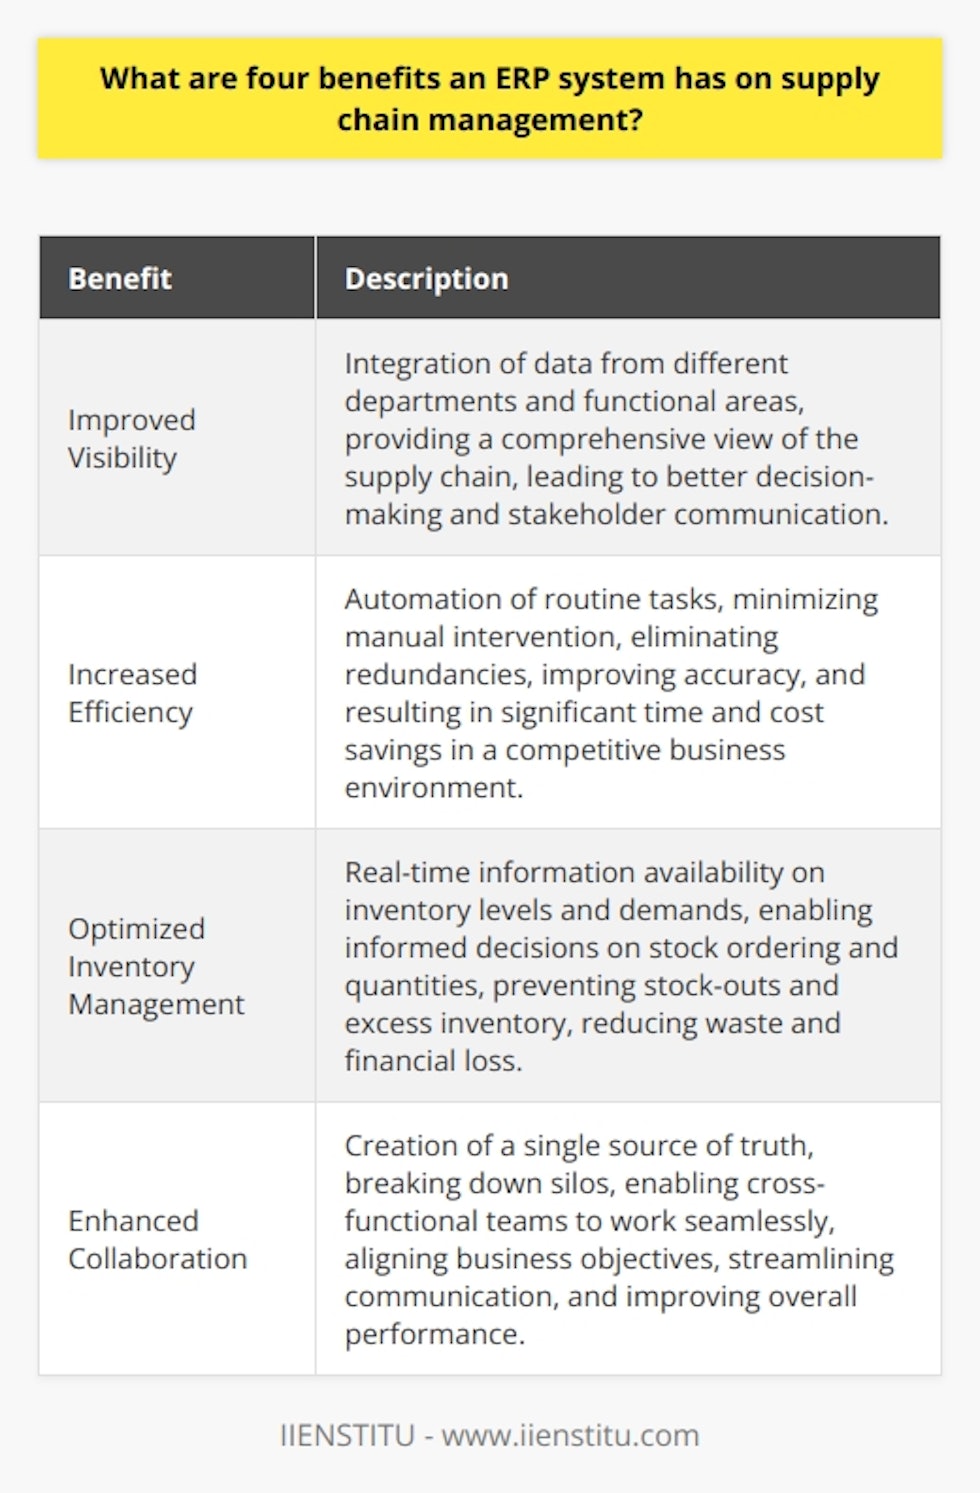 Four benefits an ERP system has on supply chain management are improved visibility, increased efficiency, optimized inventory management, and enhanced collaboration.Improved visibility is a significant advantage of an ERP system in supply chain management. By integrating data from different departments and functional areas, businesses can gain a comprehensive view of the supply chain. This promotes better decision-making and ensures all relevant stakeholders are kept informed.Increased efficiency is another advantage of ERP systems. By automating routine tasks, businesses can minimize manual intervention, eliminate redundancies, and improve accuracy. This leads to significant time and cost savings, which are crucial in a competitive business environment.Optimized inventory management is a benefit of implementing an ERP system. ERP systems provide real-time information about inventory levels and demands, allowing businesses to make informed decisions about when to order stock and in what quantities. This prevents stock-outs and excess inventory, reducing waste and financial loss.Enhanced collaboration is fostered by an ERP system. By creating a single source of truth, the ERP system breaks down silos and enables cross-functional teams to work together seamlessly. This leads to better alignment of business objectives, streamlined communication, and improved overall performance.By leveraging these benefits, businesses can achieve a more robust and agile supply chain. This allows them to better meet customer demands and stay ahead of the competition. ERP systems provide valuable solutions to supply chain management, enabling businesses to thrive in a dynamic market.